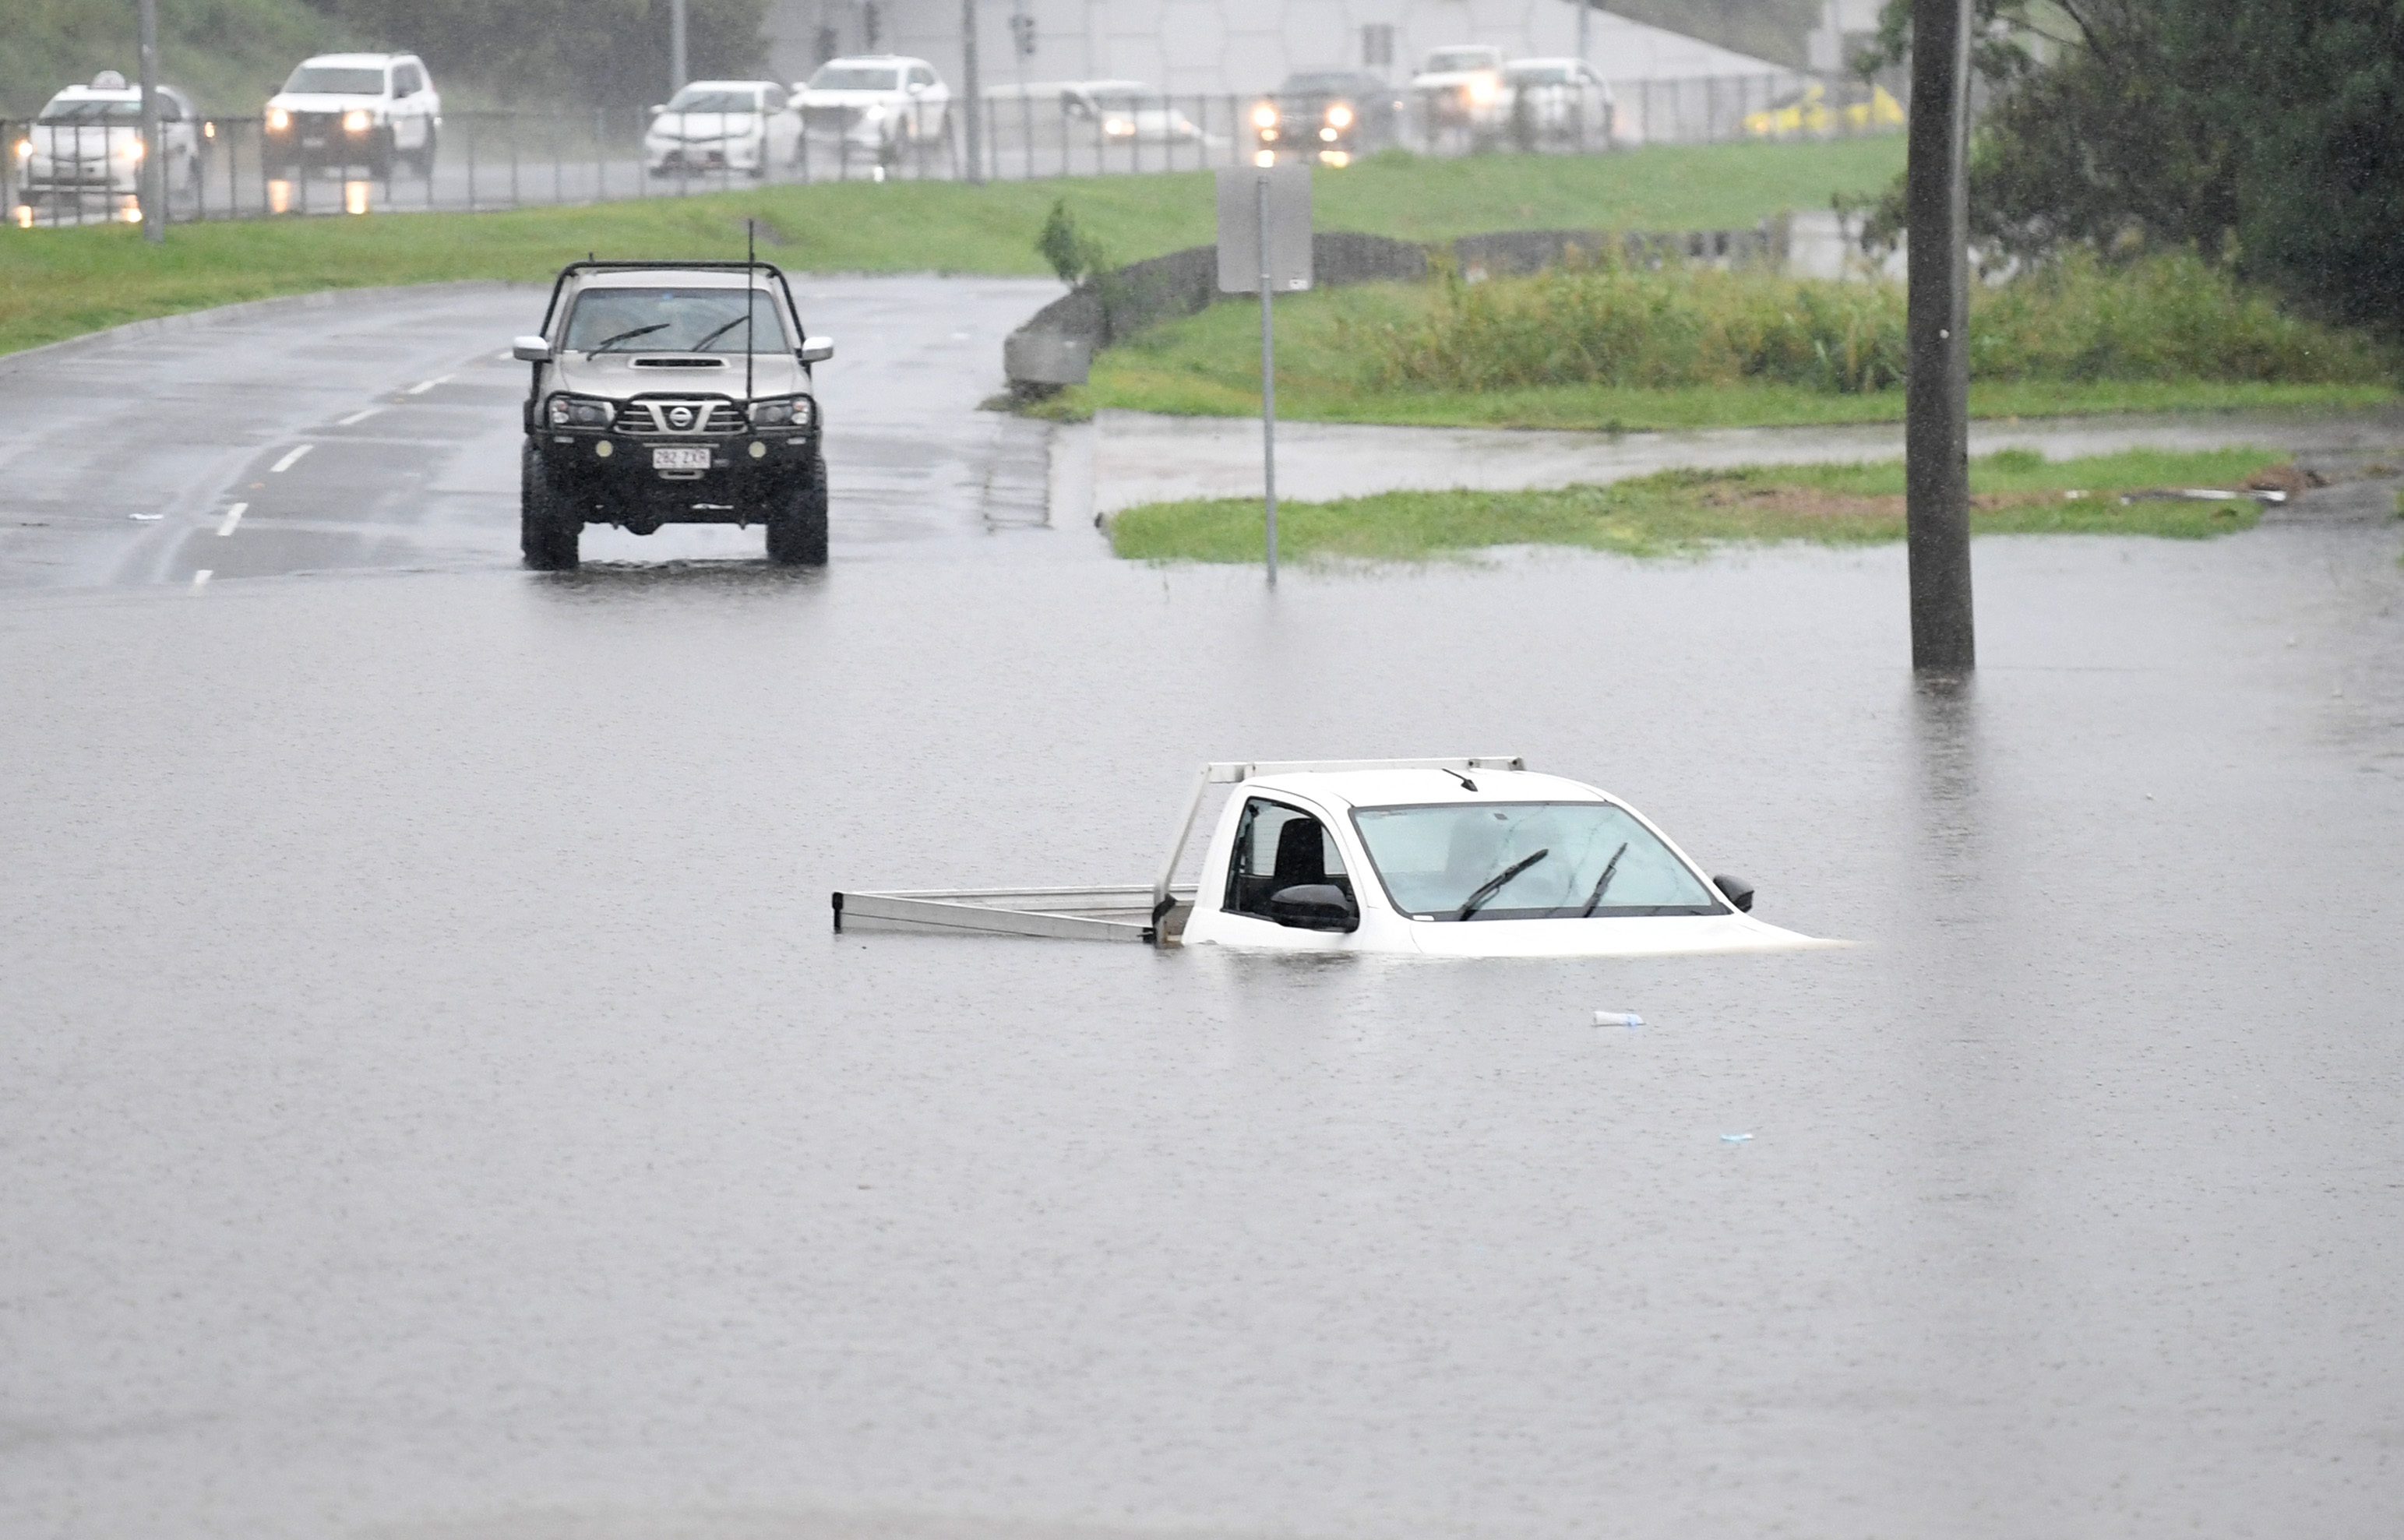 A vehicle is submerged in flood water on February 26, 2022 in the suburb of Oxley in Brisbane, Australia.